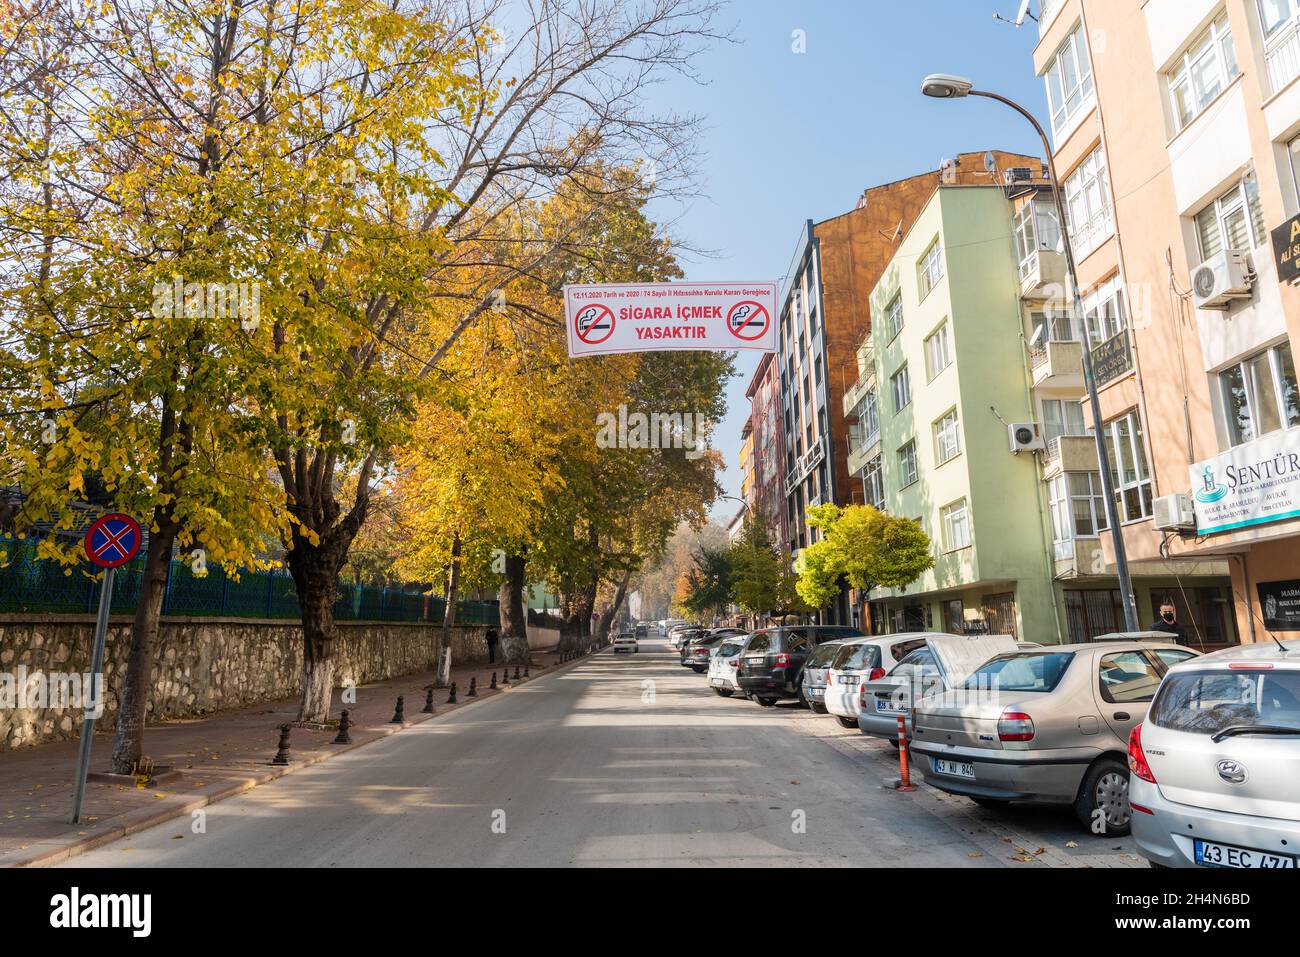 Kutahya, Turkey – November 17, 2020. Street view in Kutahya city in Turkey, with a billboard stating ‘Smoking prohibited’. Smoking in outdoor places w Stock Photo